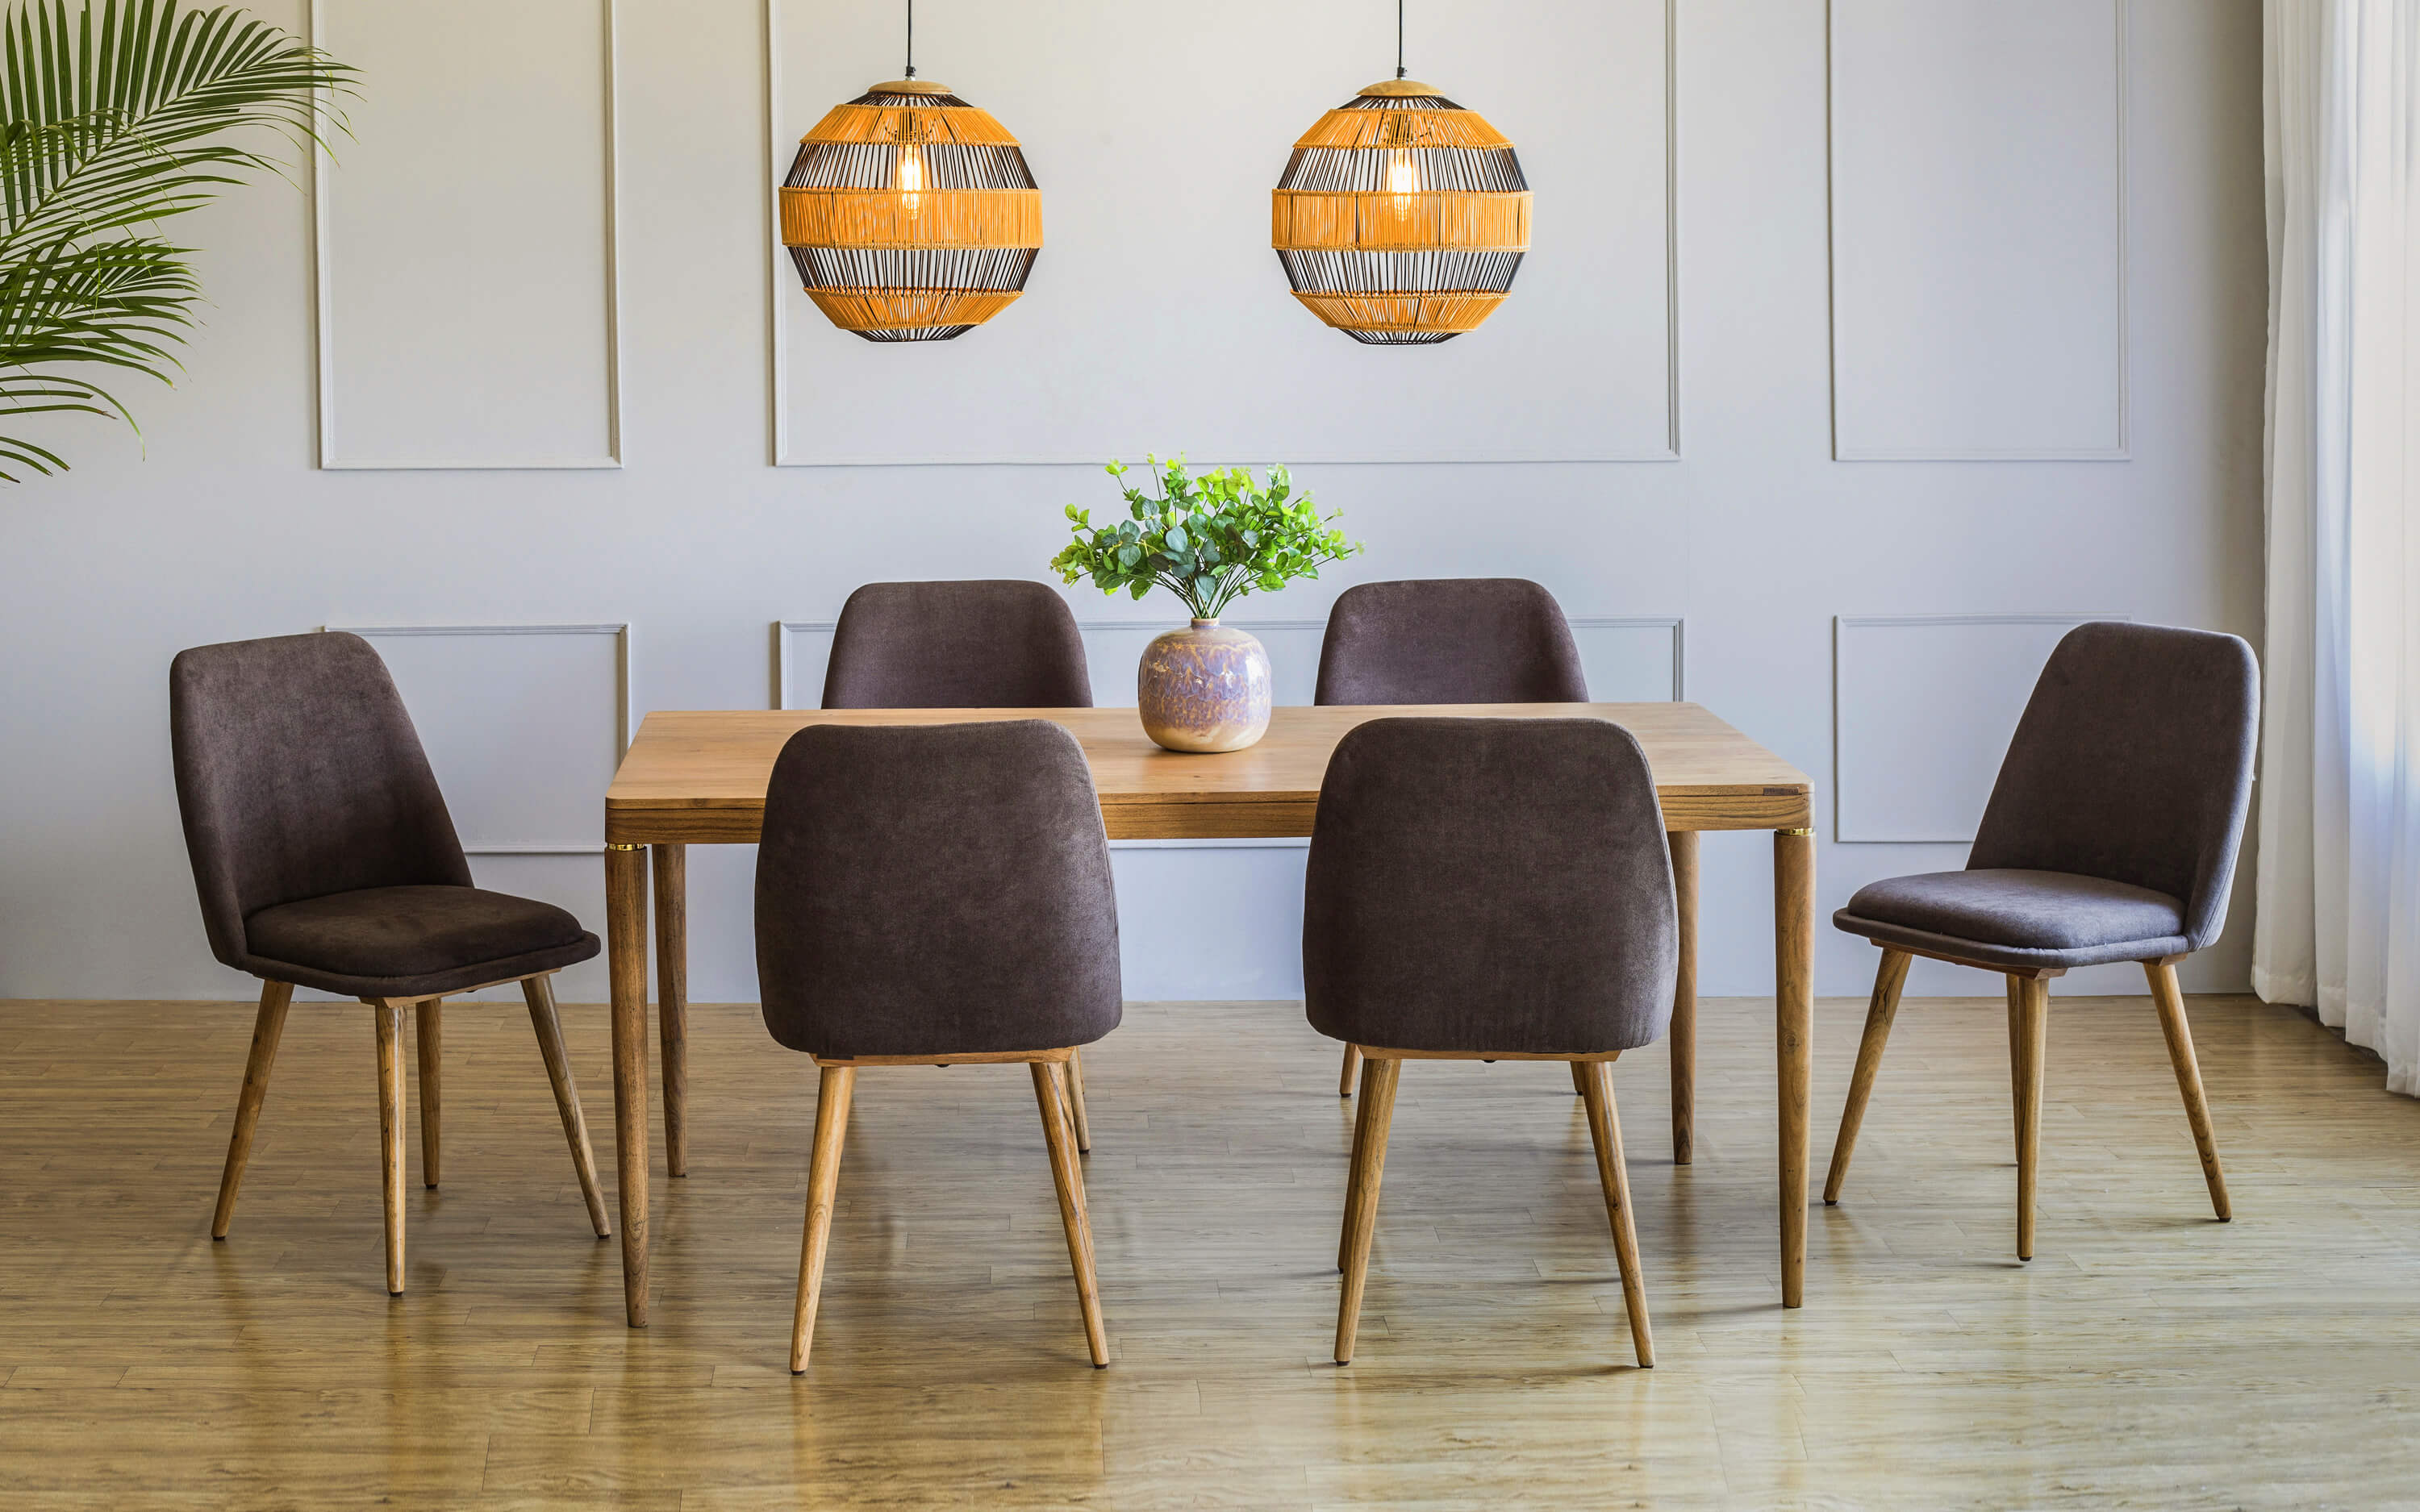 Buta Dining Table With 6 Chairs Brown -Hanging Lights: Illuminating Elegance